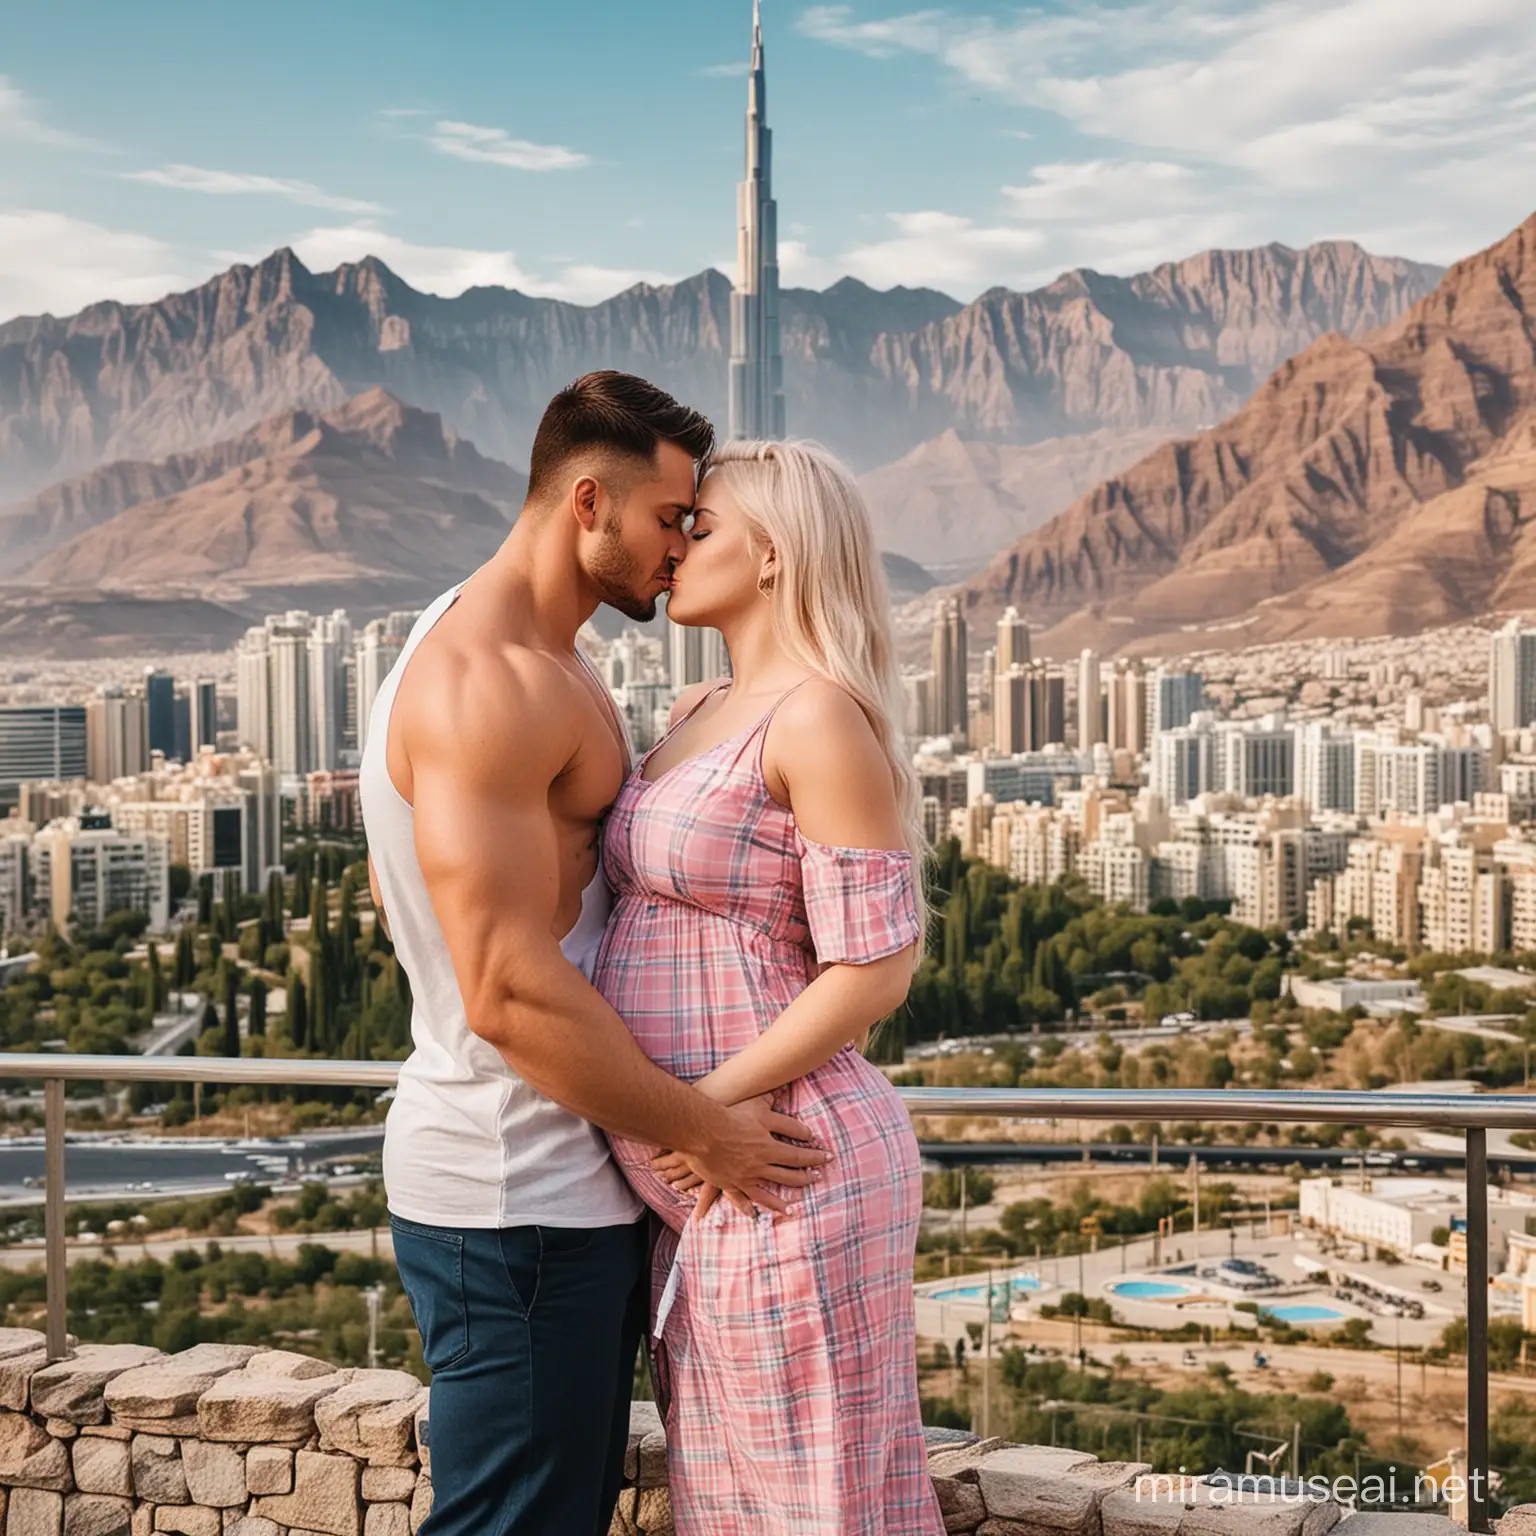 Adorable Pregnant Couple Embracing in Mountain Villa with Private Plane